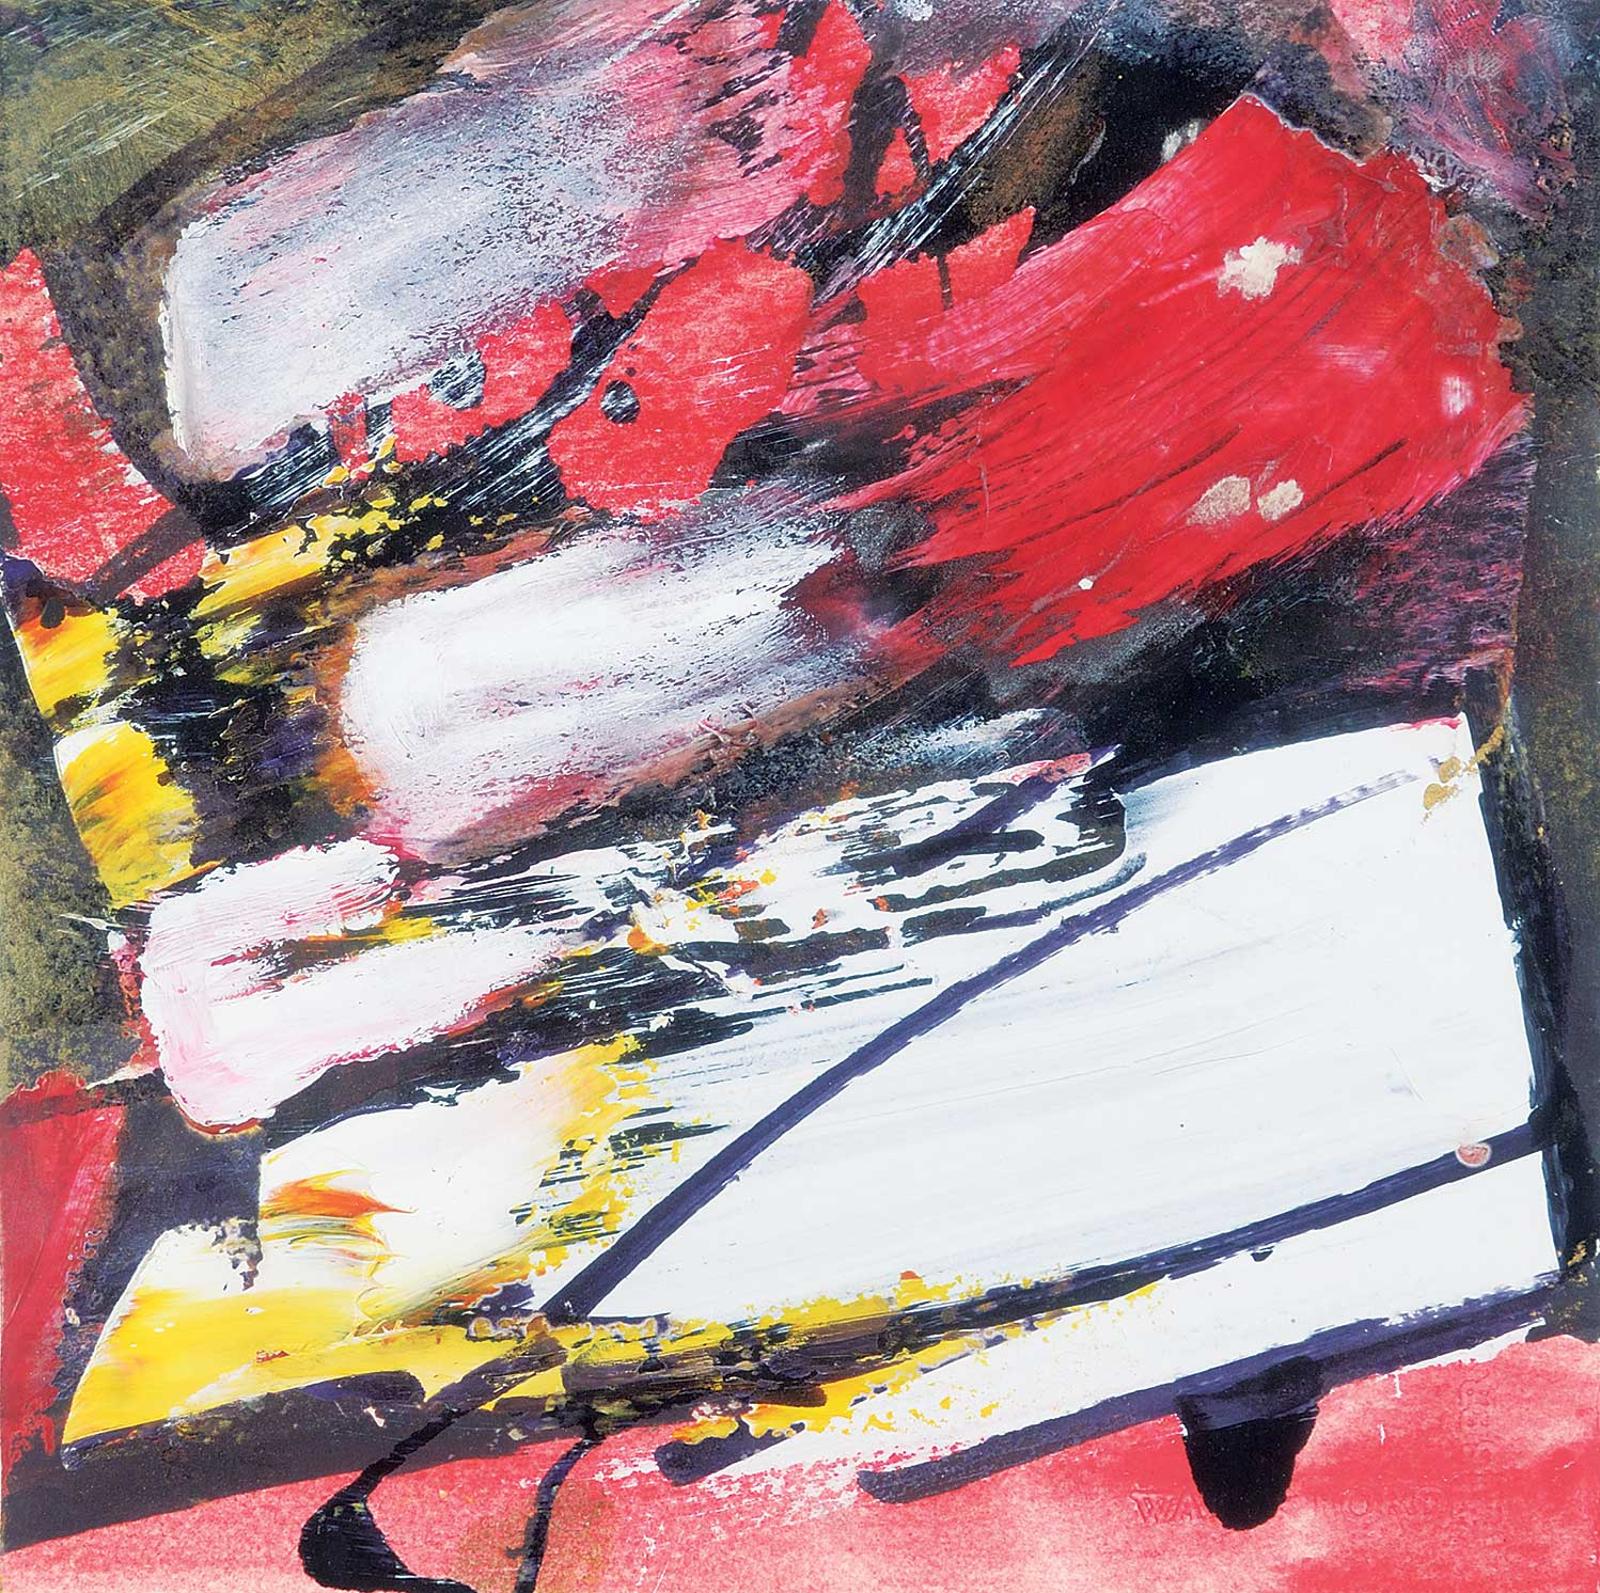 Marcelle Ferron (1924-2001) - Untitled - Red, Black and Yellow Abstract